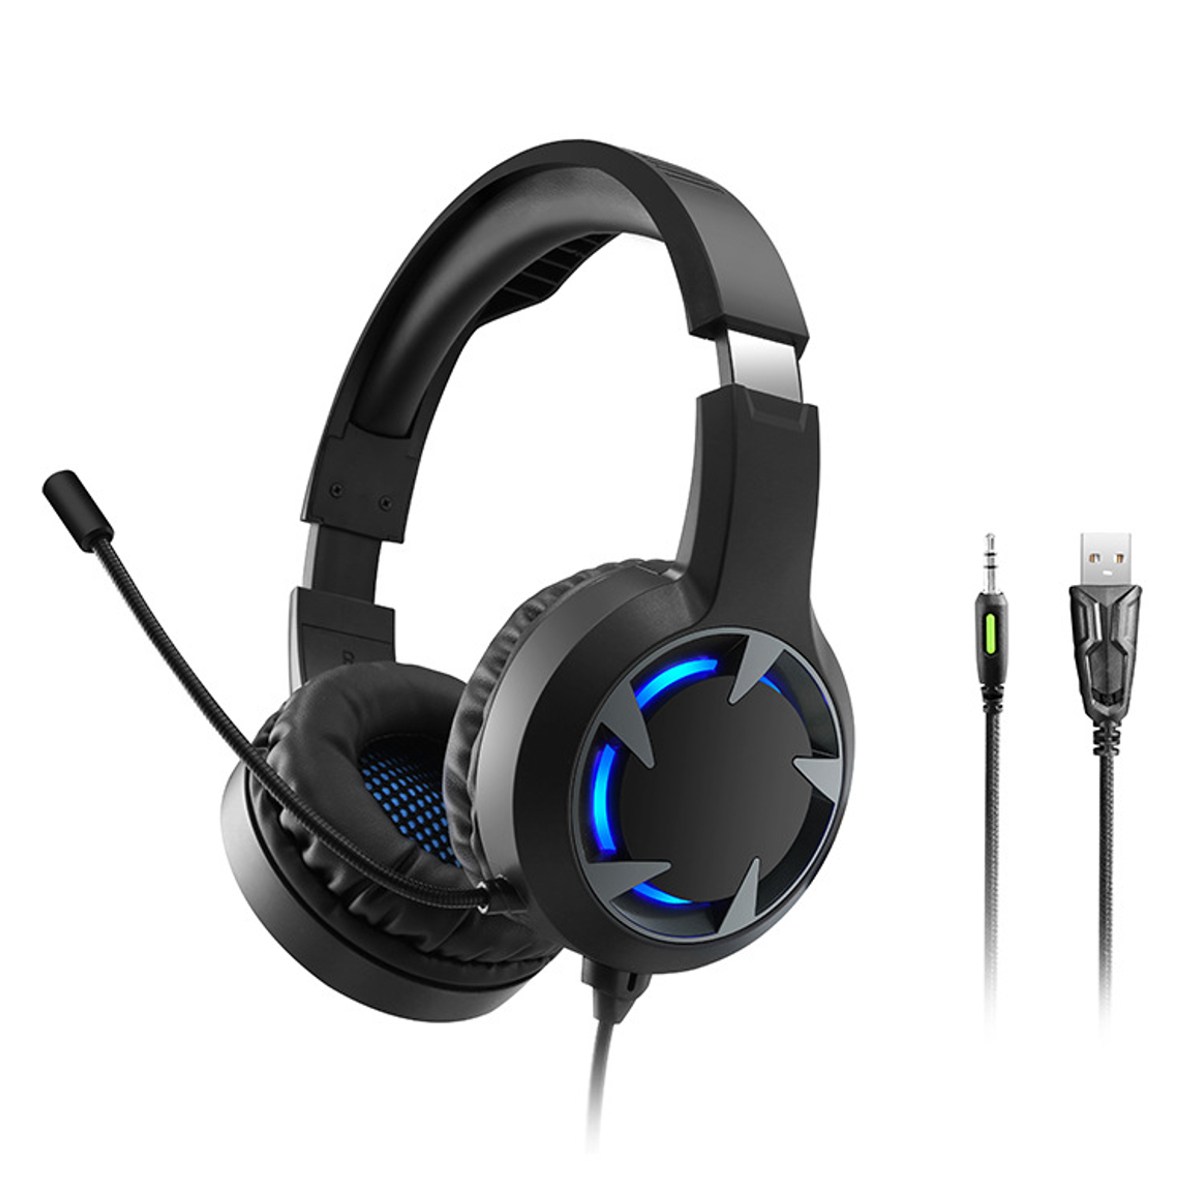 Bakeey Wired Headphones Stereo Bass Surround Gaming Headset for PS4 New for Xbox One PC with Mic 1